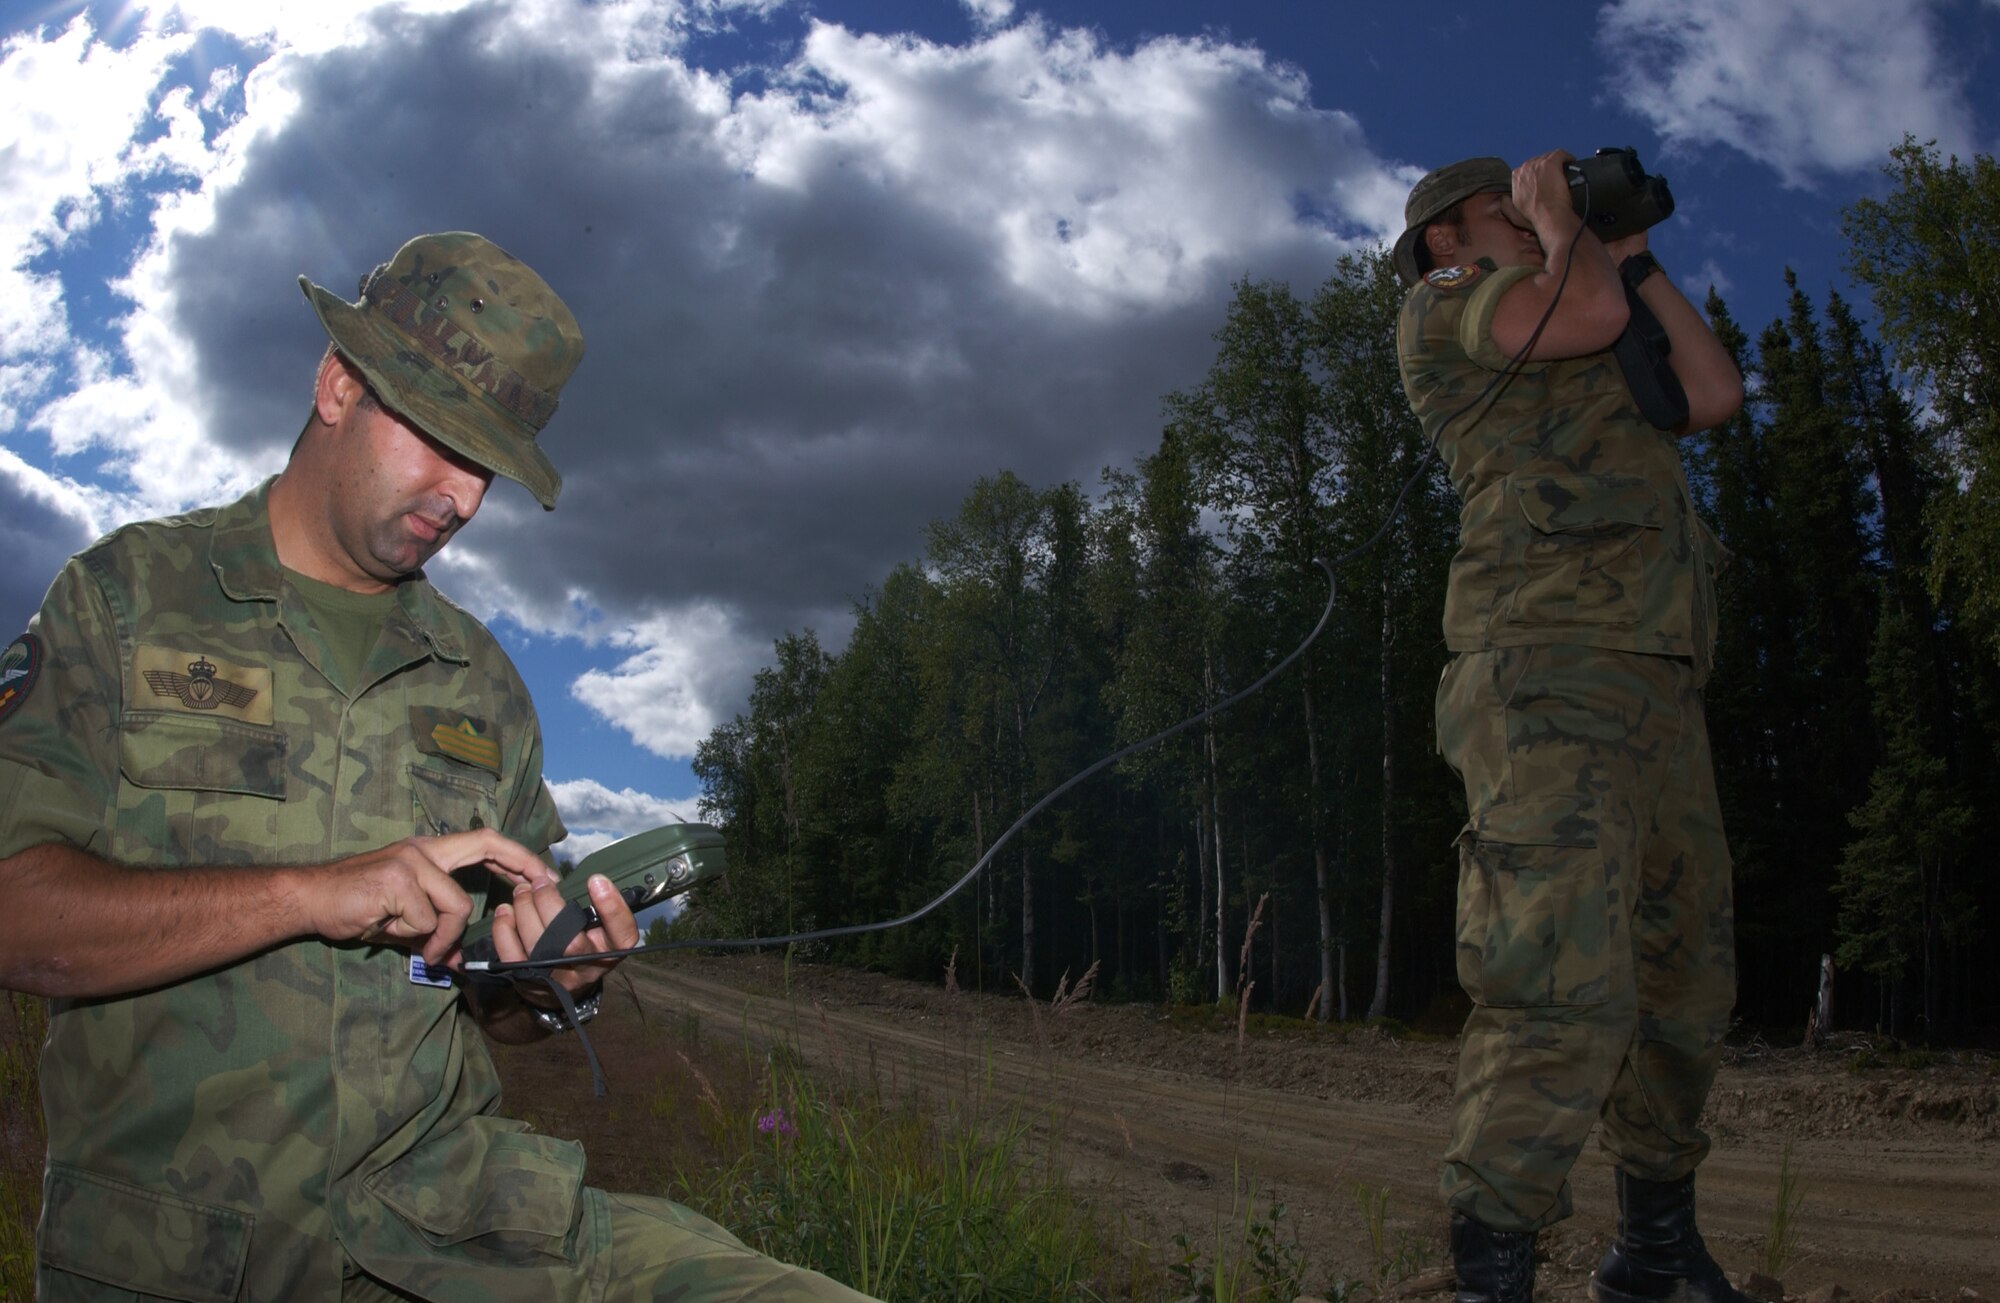 EIELSON AIR FORCE BASE, Alaska -- Senior Airman Victor Martinez (Left) and Airman Basic Hugo Lesta (Right), Spanish Air Force, Tactical Air Control Party, uses a range finder and GPS unit to mark the target location and relay that information to the pilots on the Pacific Alaskan Range Complex on July 16 during Red Flag-Alaska 07-3. The PARC provides 67,000 square miles of airspace, one conventional bombing range and two tactical bombing ranges containing more than 400 different types of targets and more than 30 threat simulators which allows them to exchange tactics, techniques, and procedures and improve interoperability. (U.S. Air Force Photo by Airman 1st Class Jonathan Snyder)